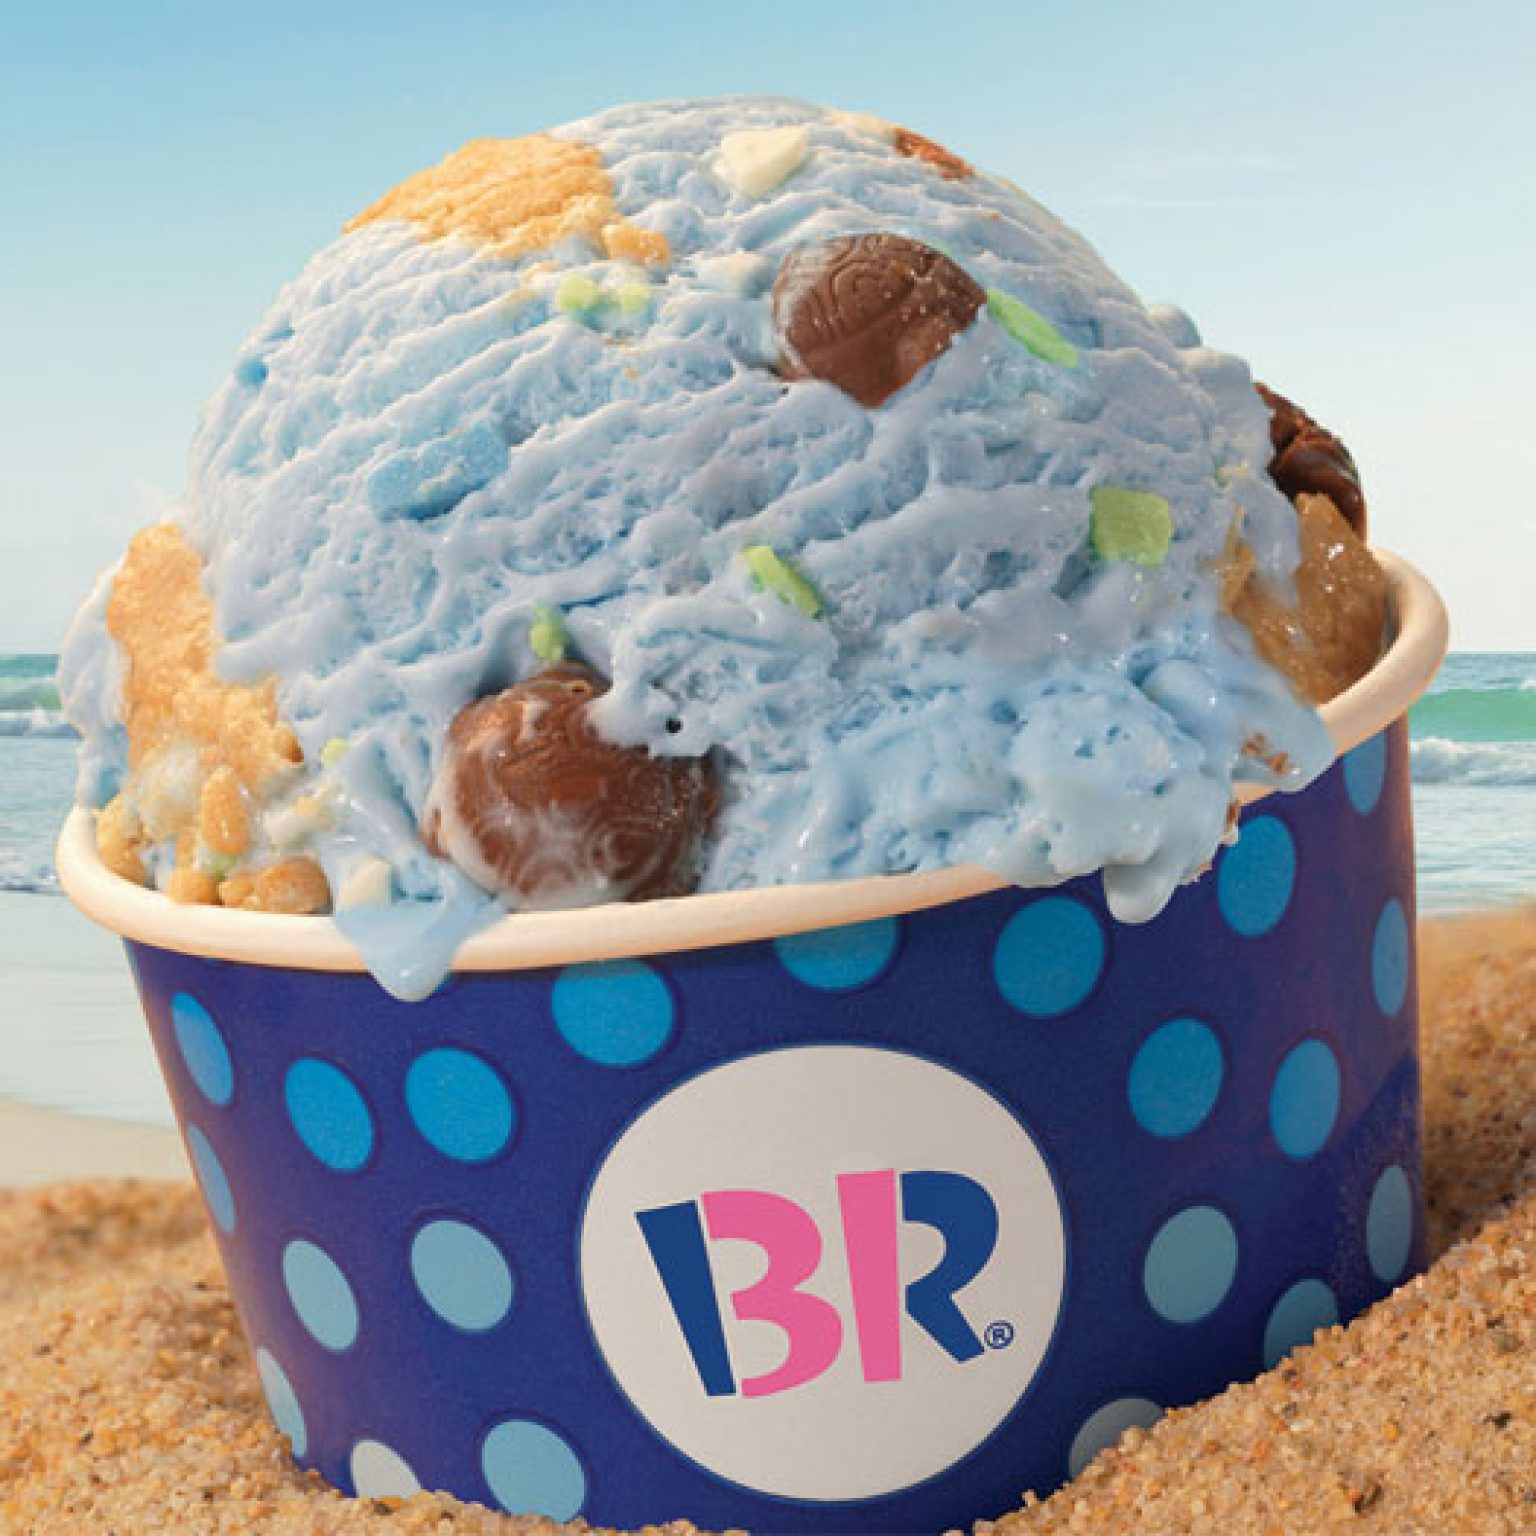 Baskin Robbins Coupons & Offers Canada July 2021 Coupons + Beach Day